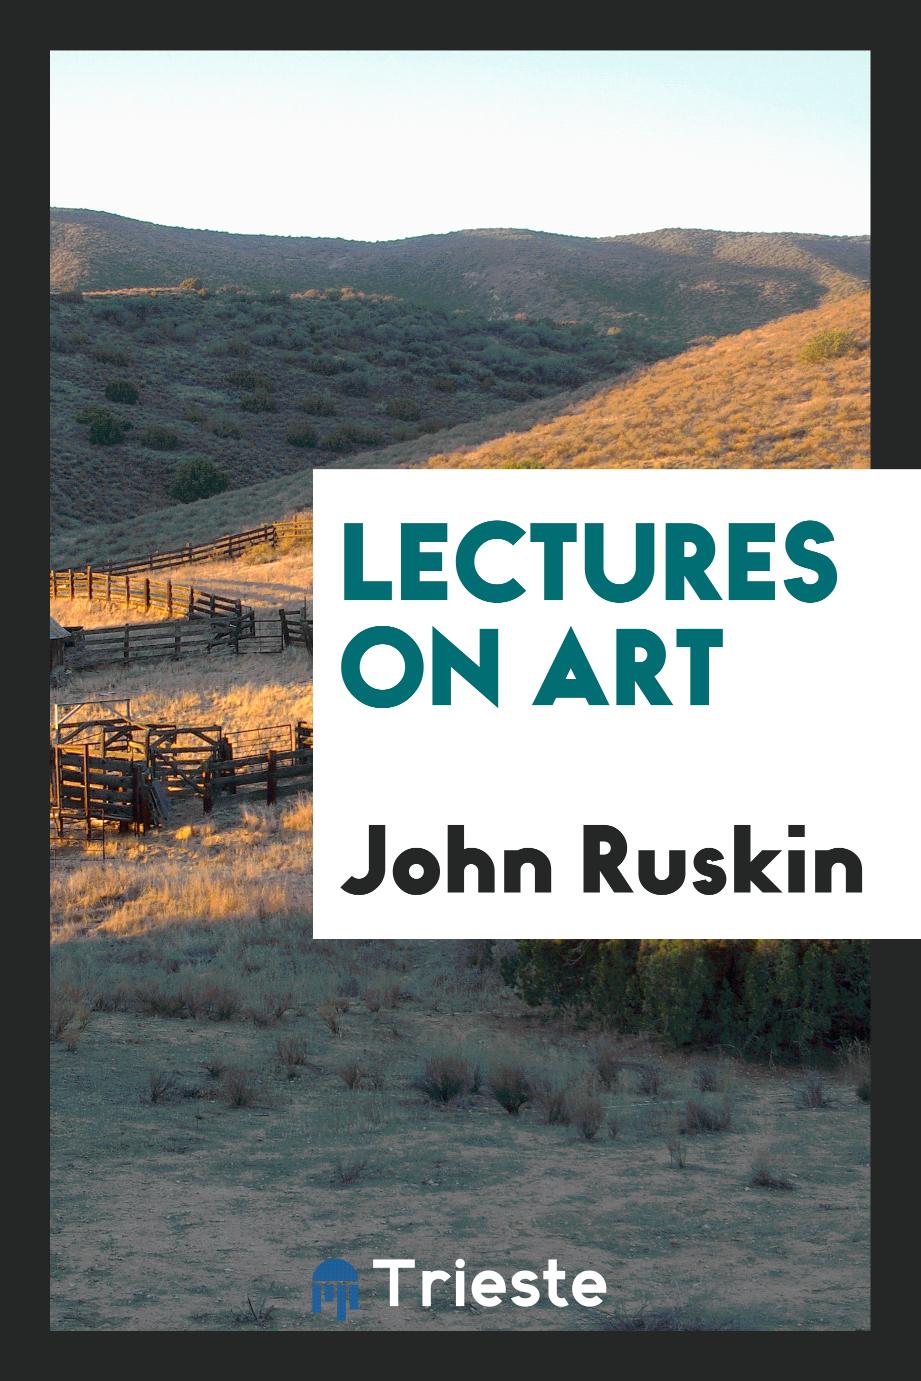 Lectures on art